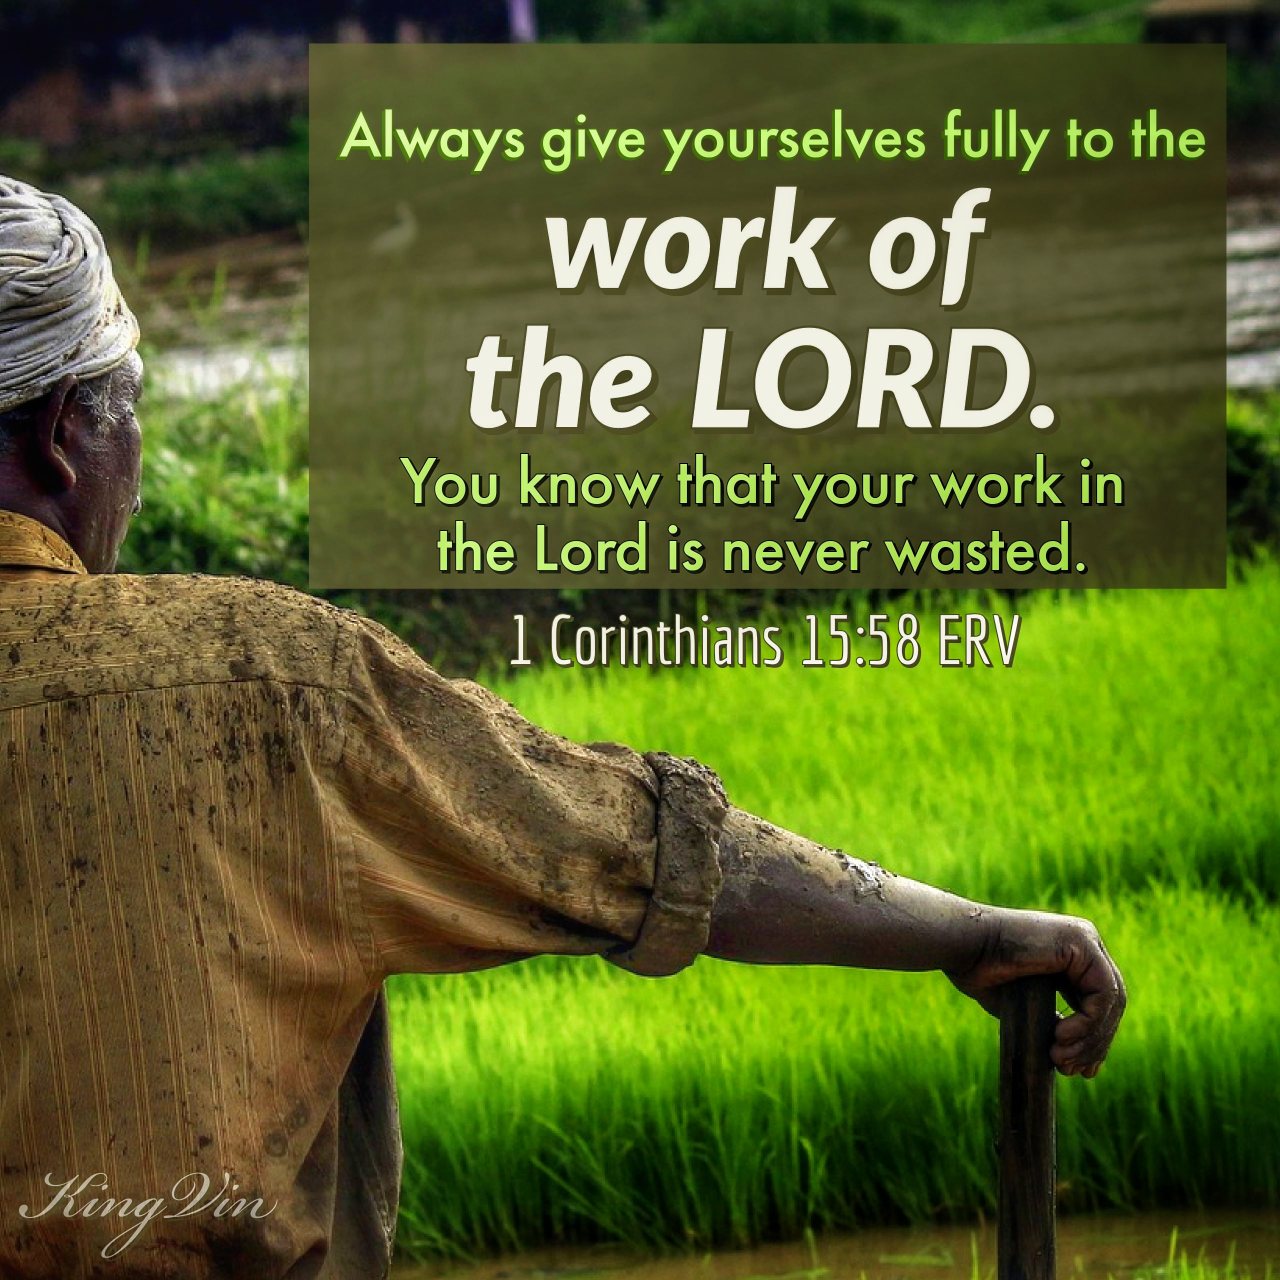 Always give yourselves fully to the work of the Lord. You know that your work in the Lord is never wasted. 1 Corinthians 15:58 ERV